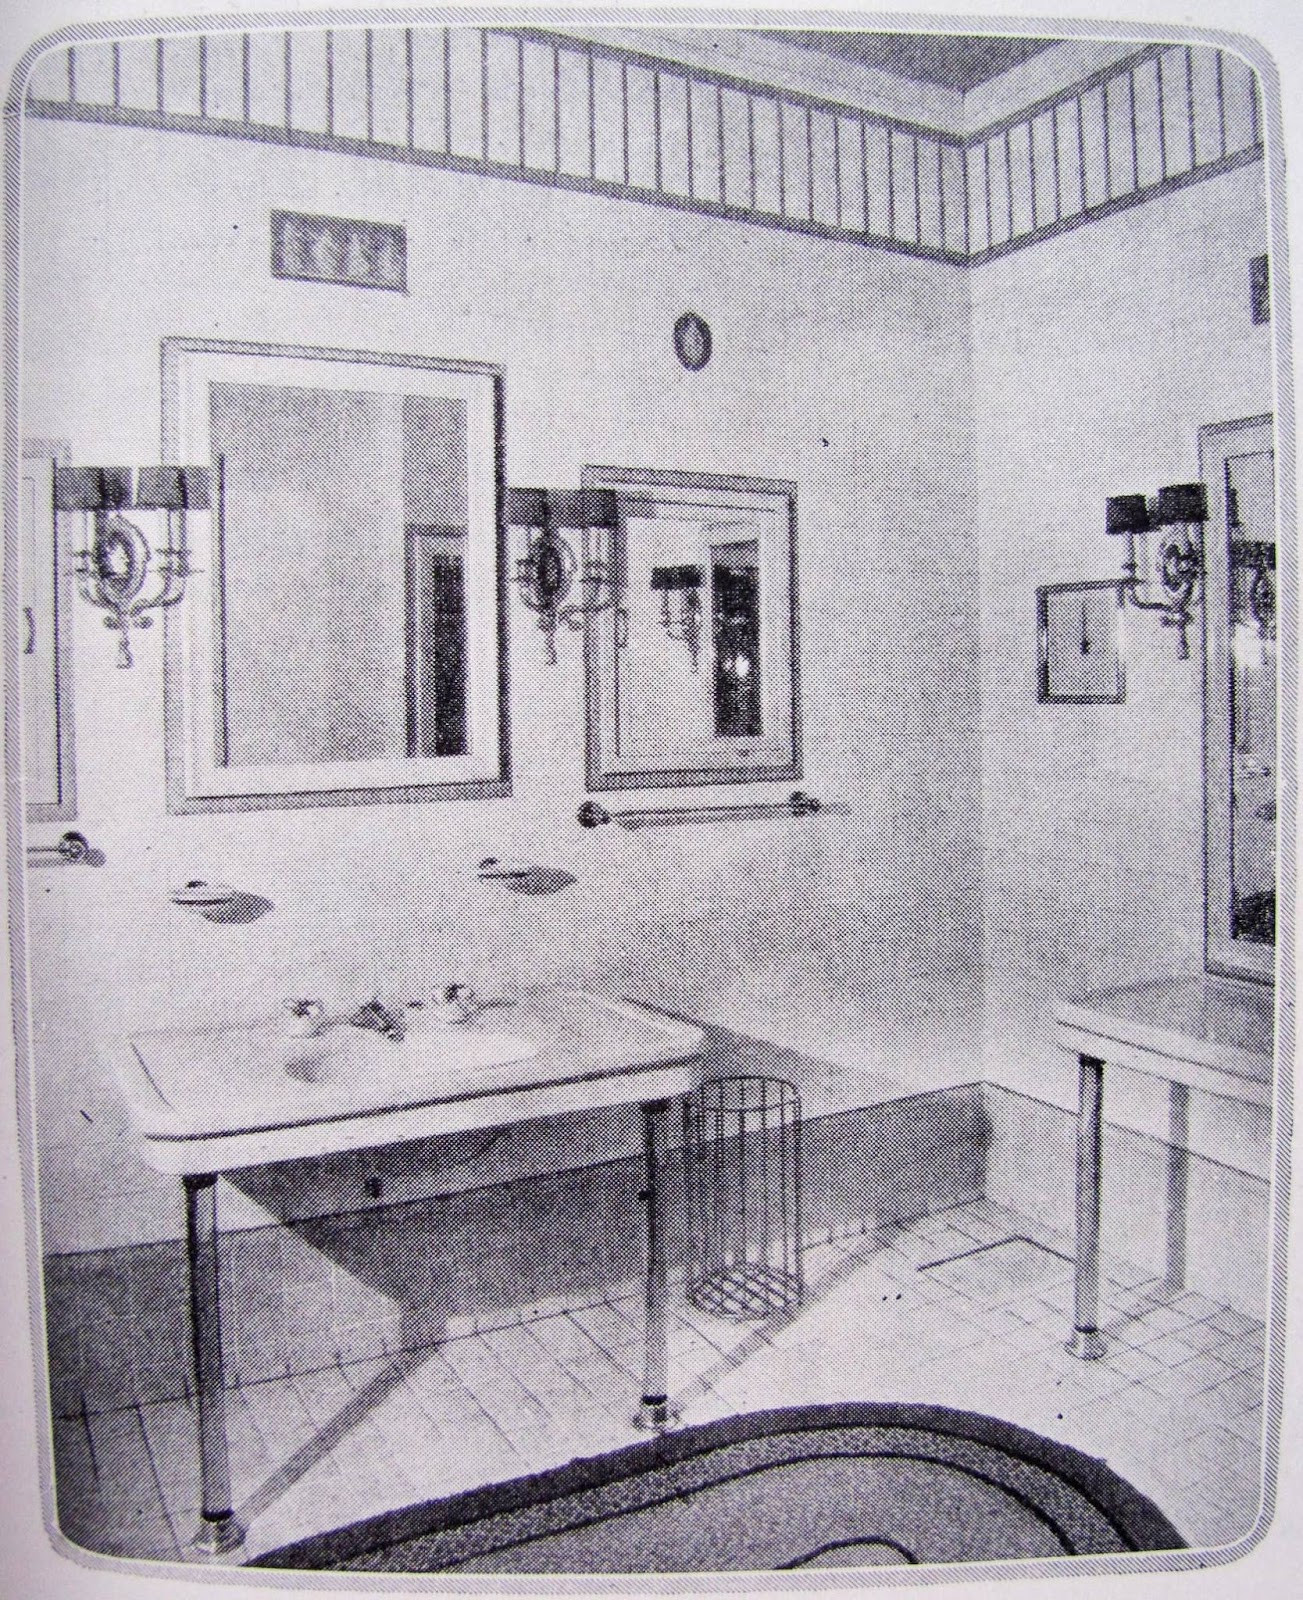 1920S Bathroom Tile
 40 wonderful pictures and ideas of 1920s bathroom tile designs